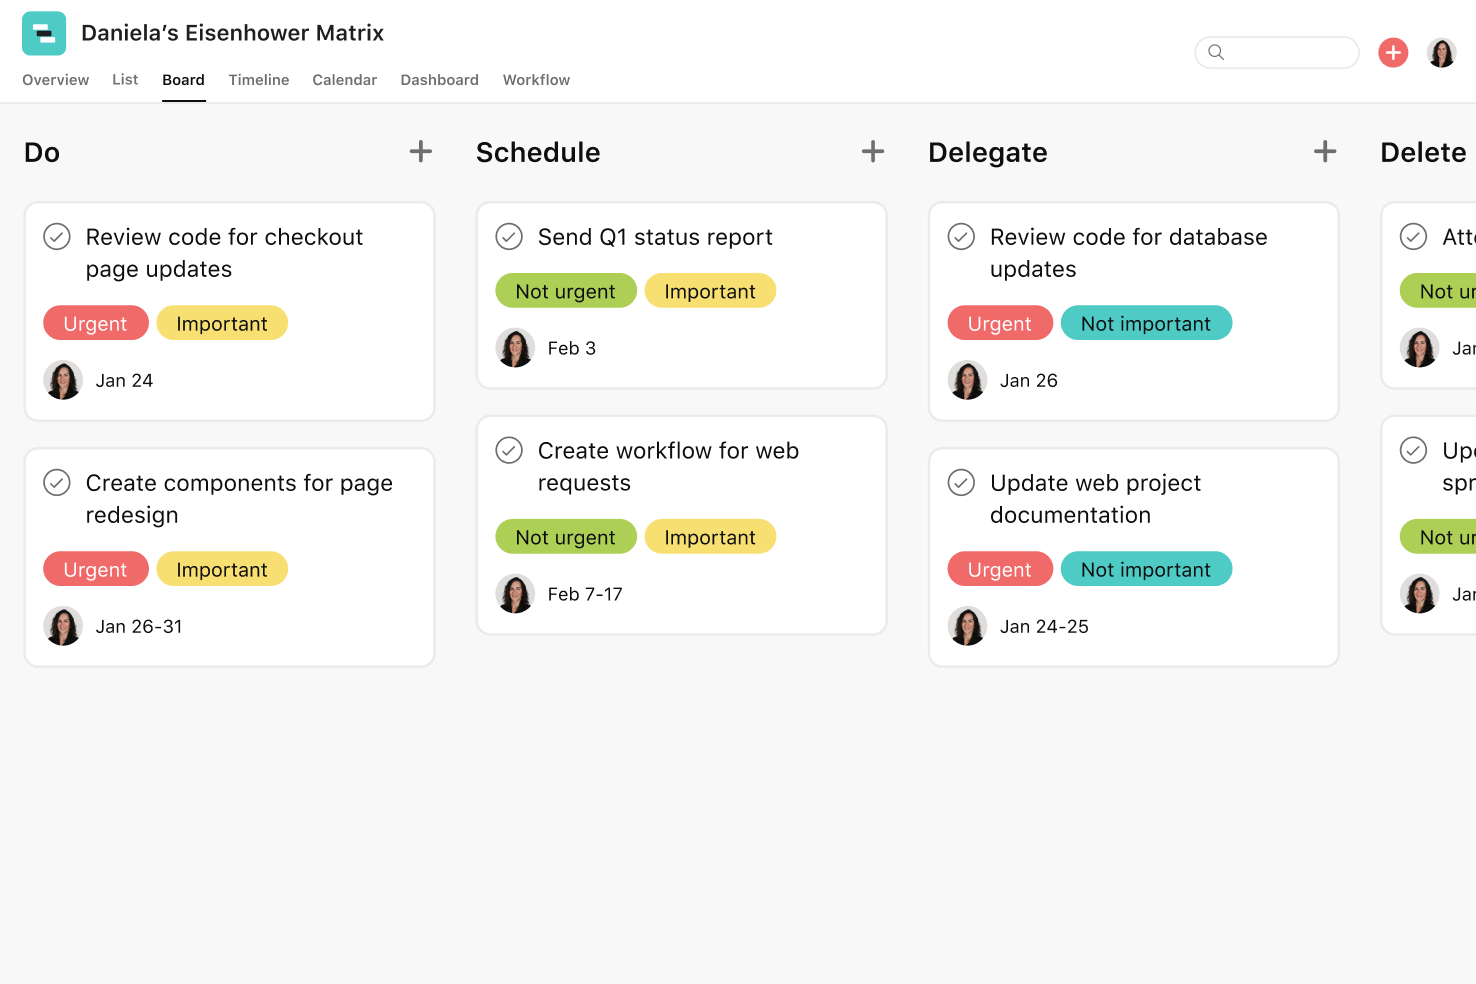 [Product ui] Actionable Eisenhower Matrix project in Asana, Kanban board style view (Boards)